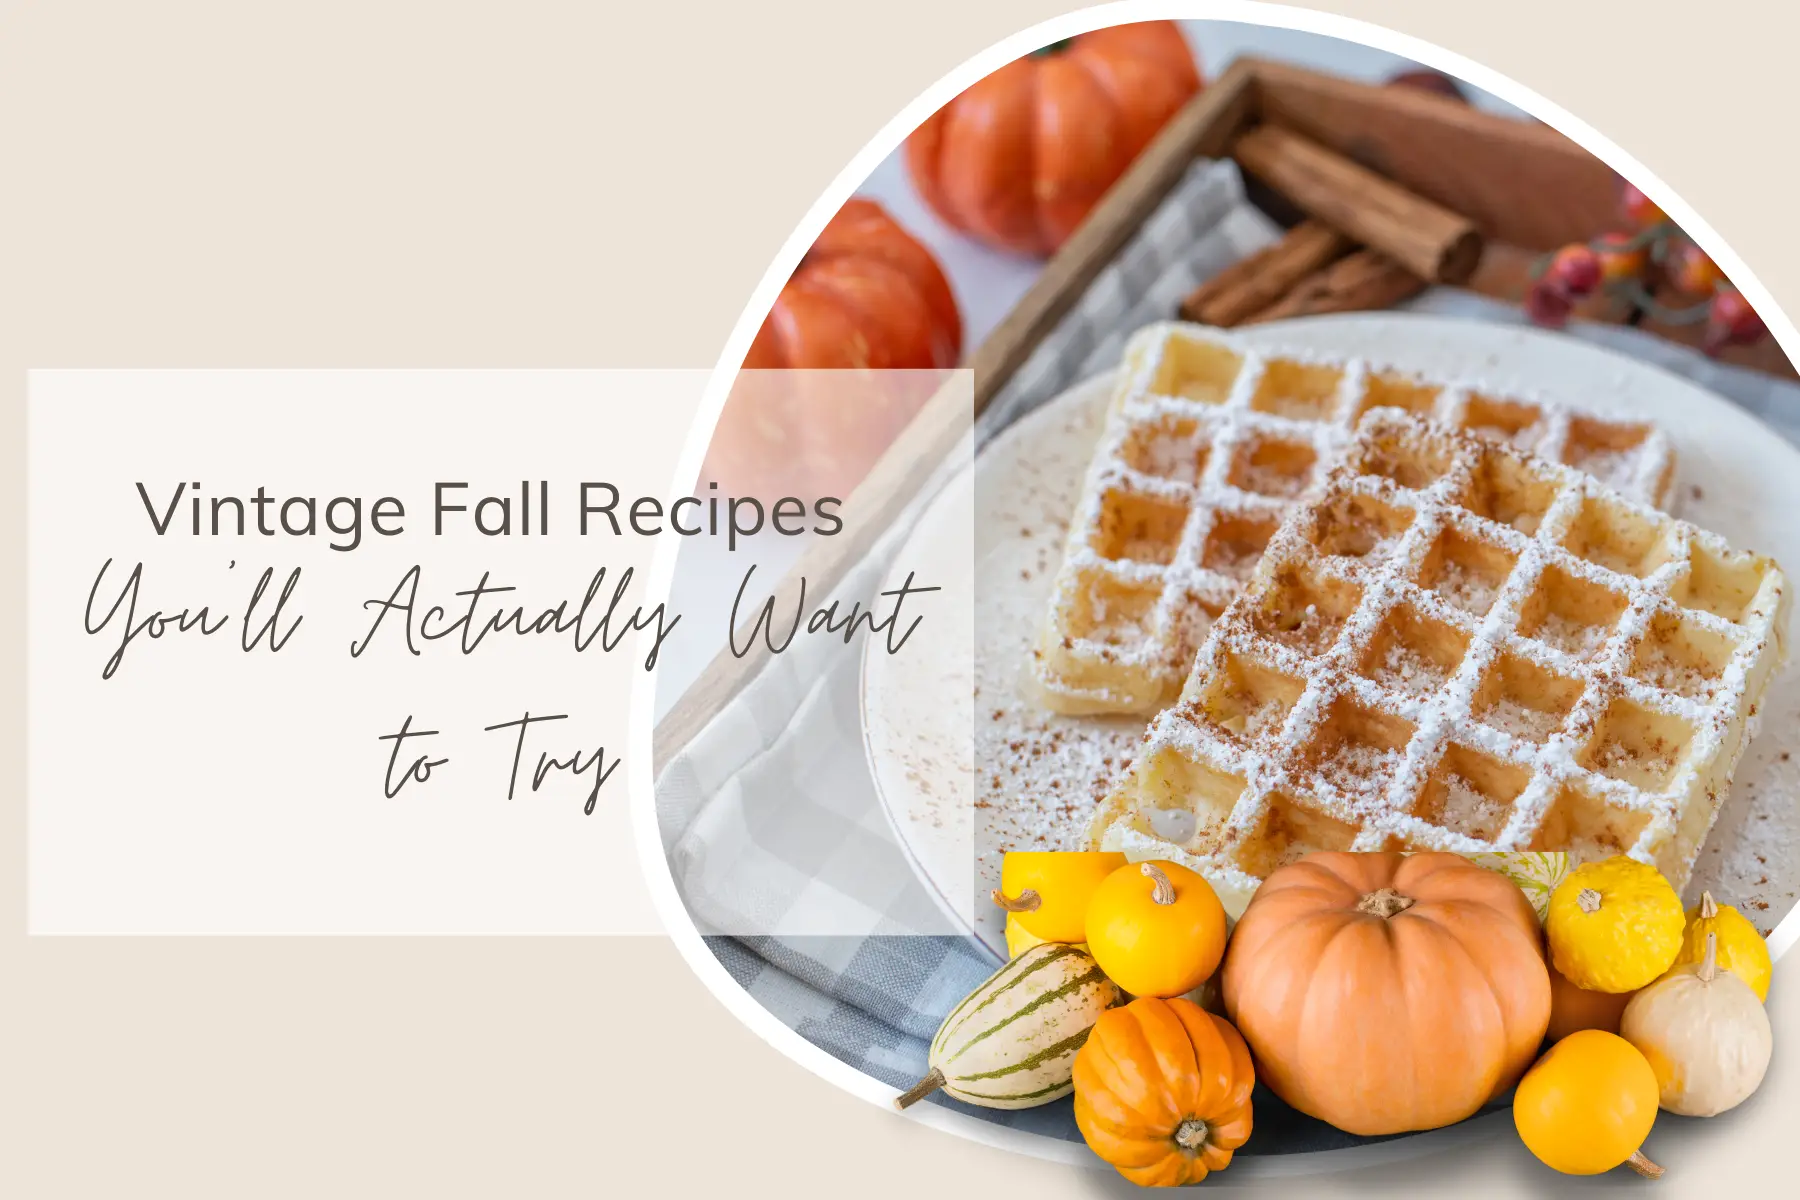 Vintage Fall Recipes You'll Actually Want to Try